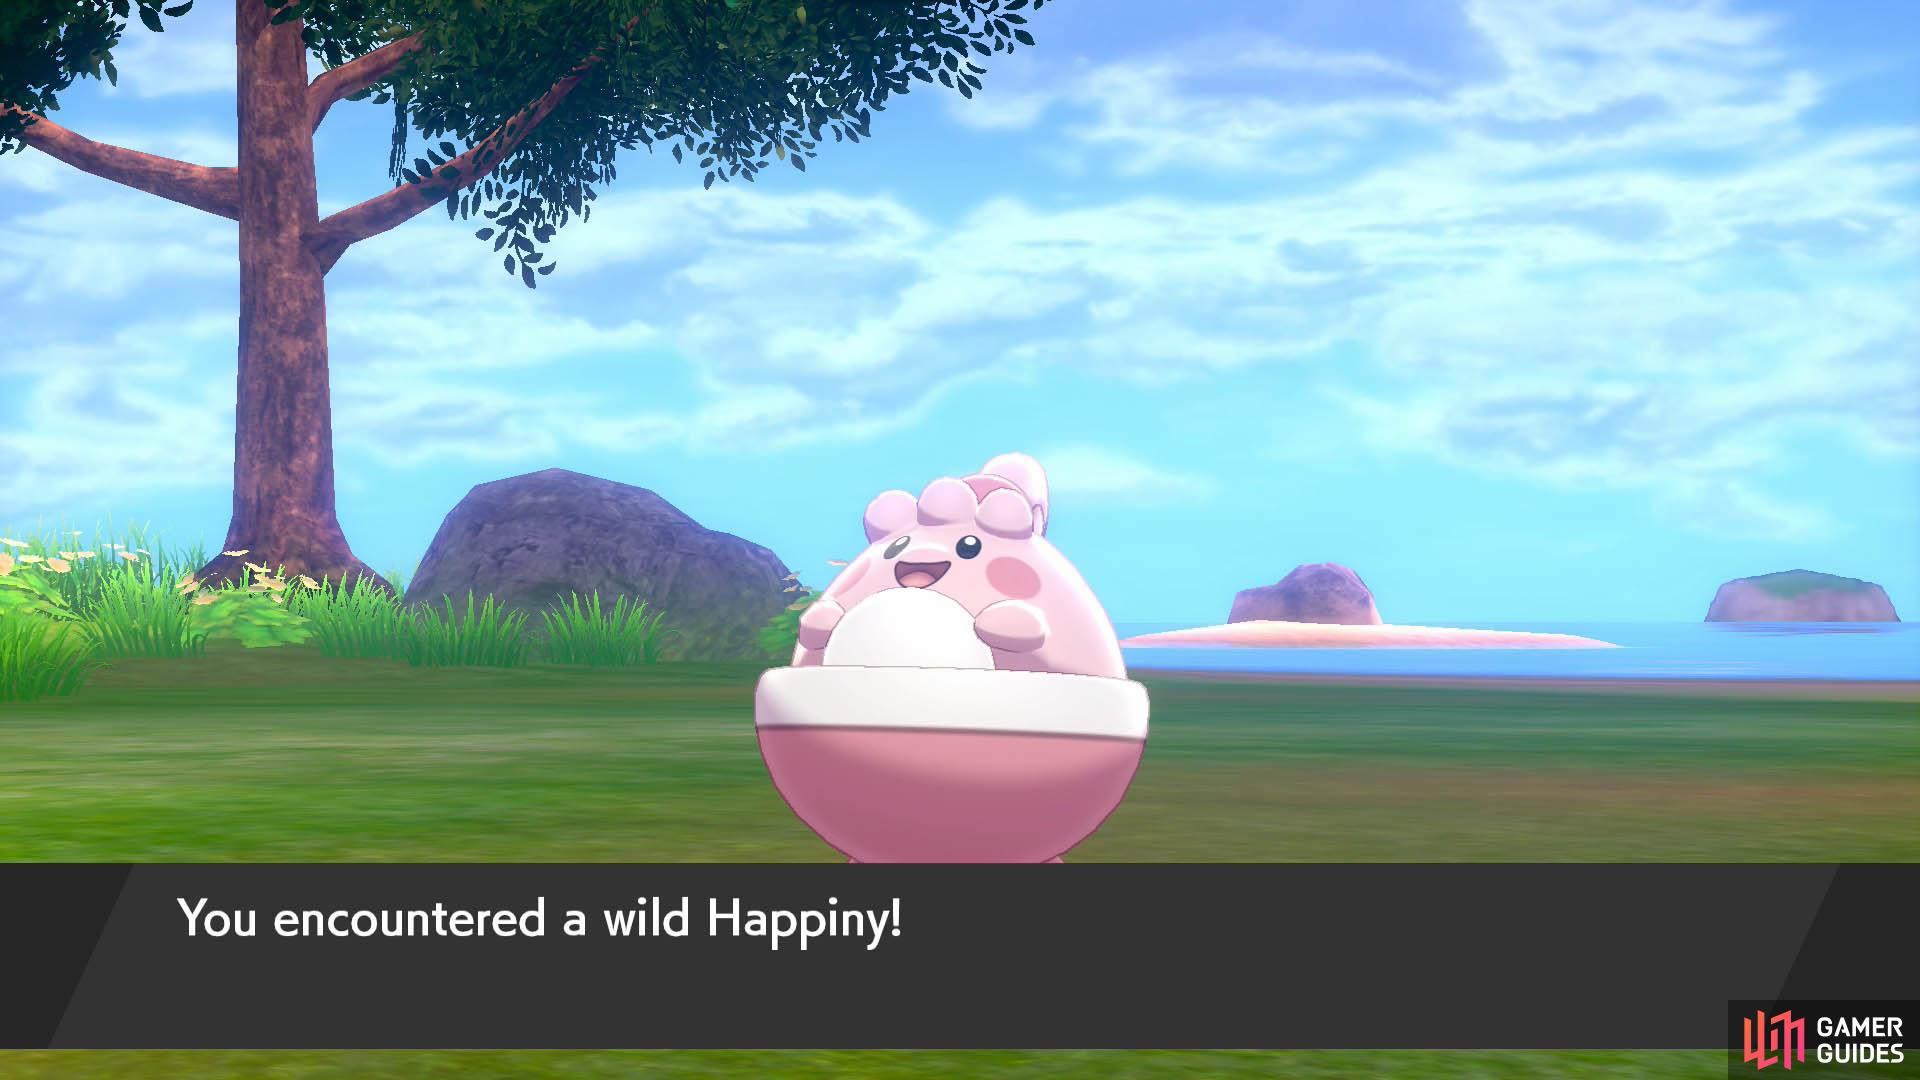 There’s a 1 in 10 chance of finding a Happiny, if you’d rather not breed Chansey.